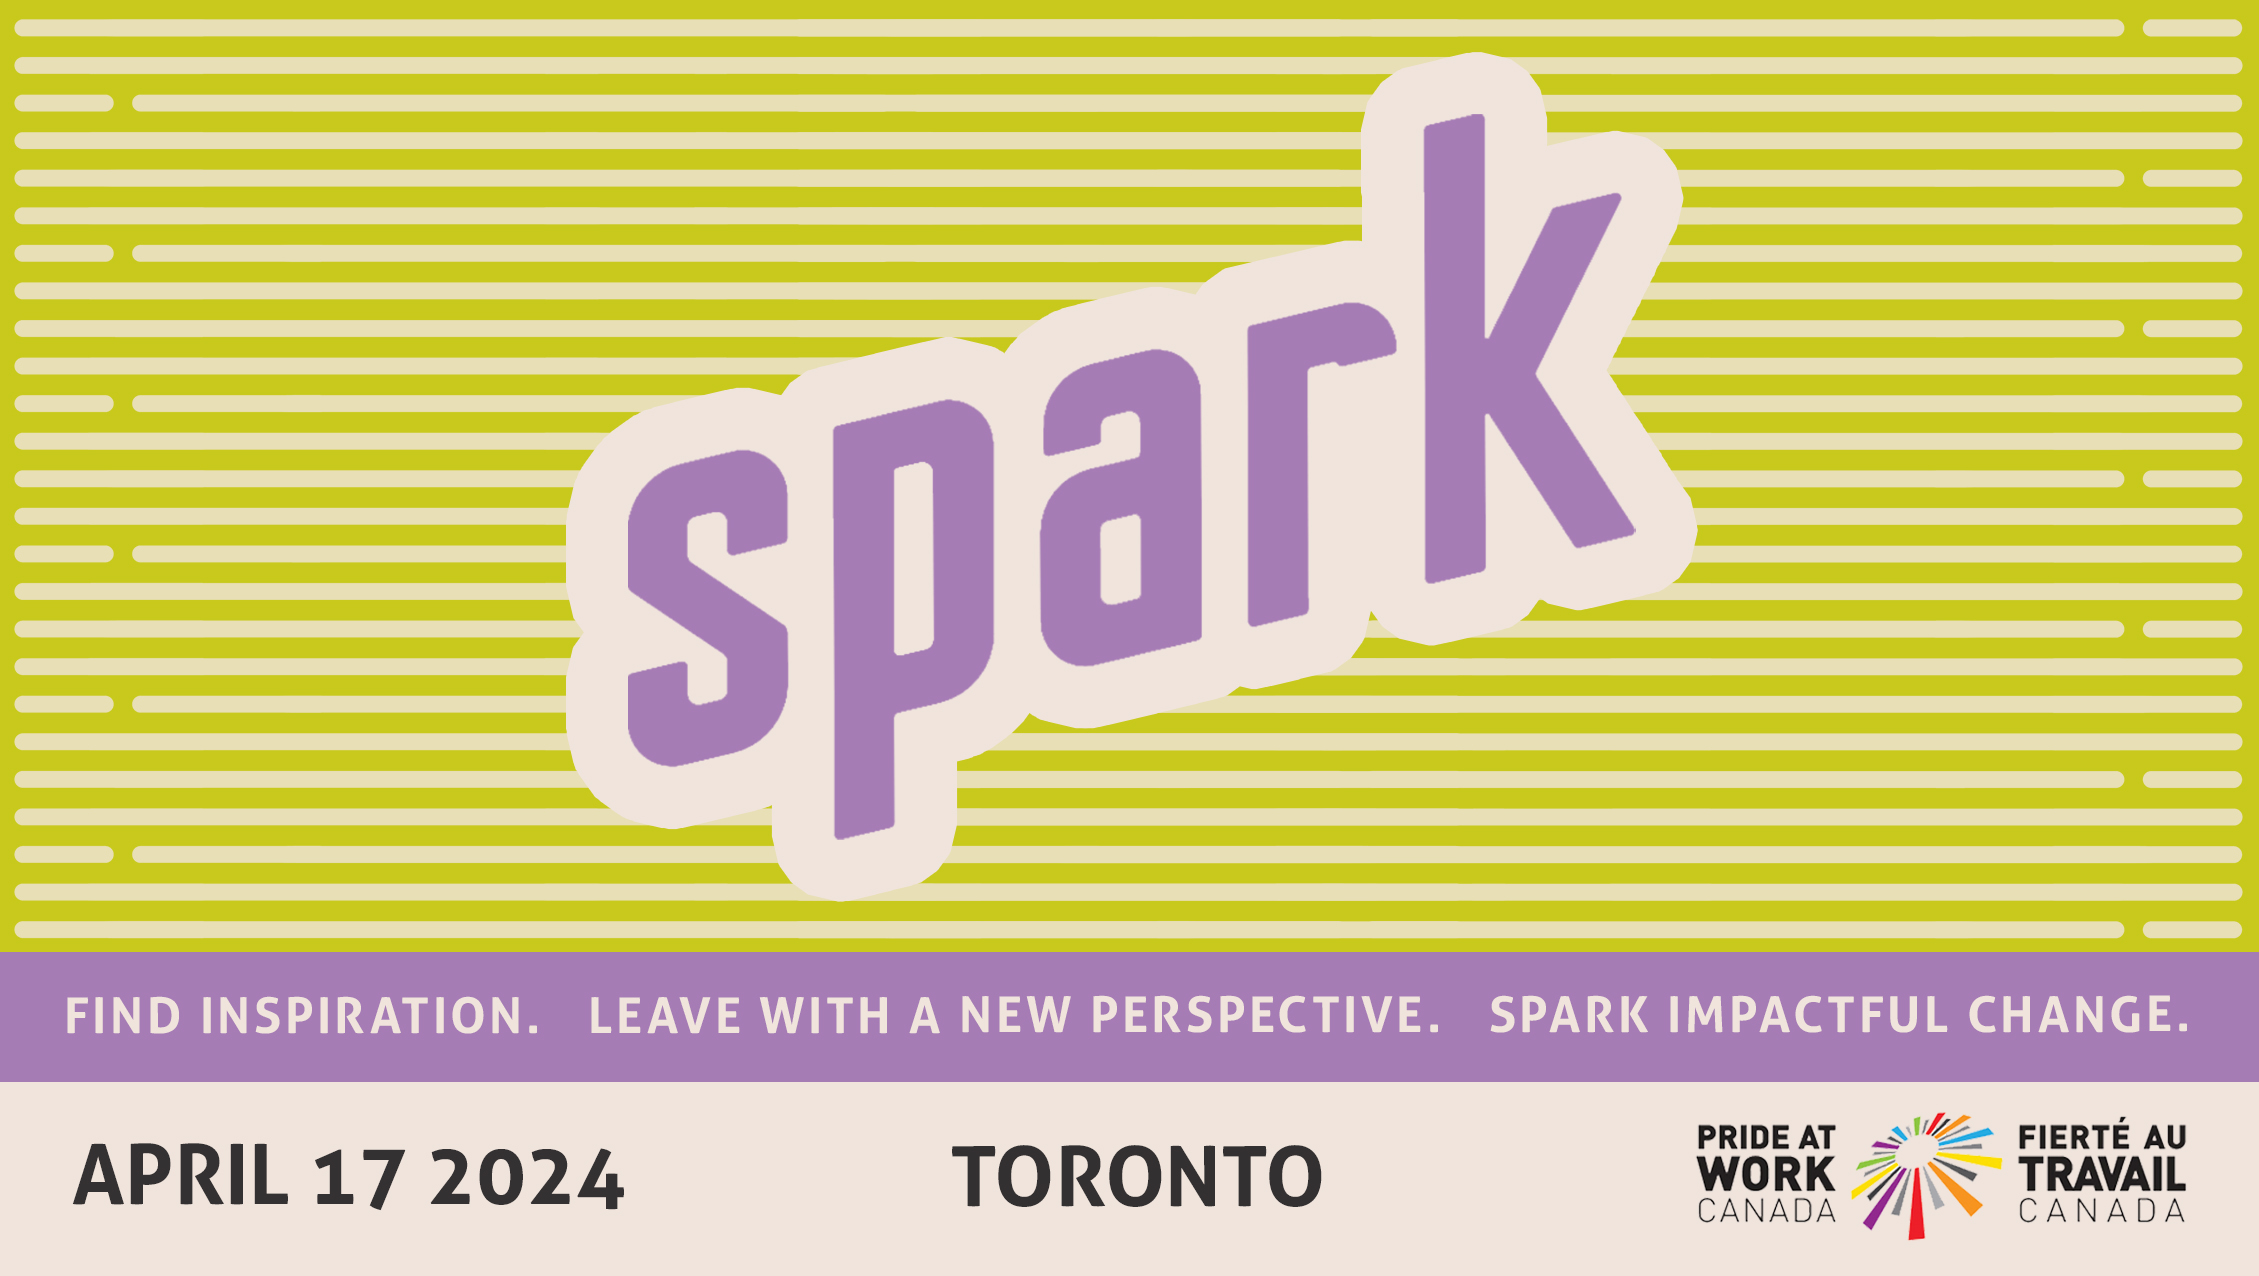 Banner with the event name Spark followed by the sentences Find inspiration. Leave with a new perspective. Spark impactful change.